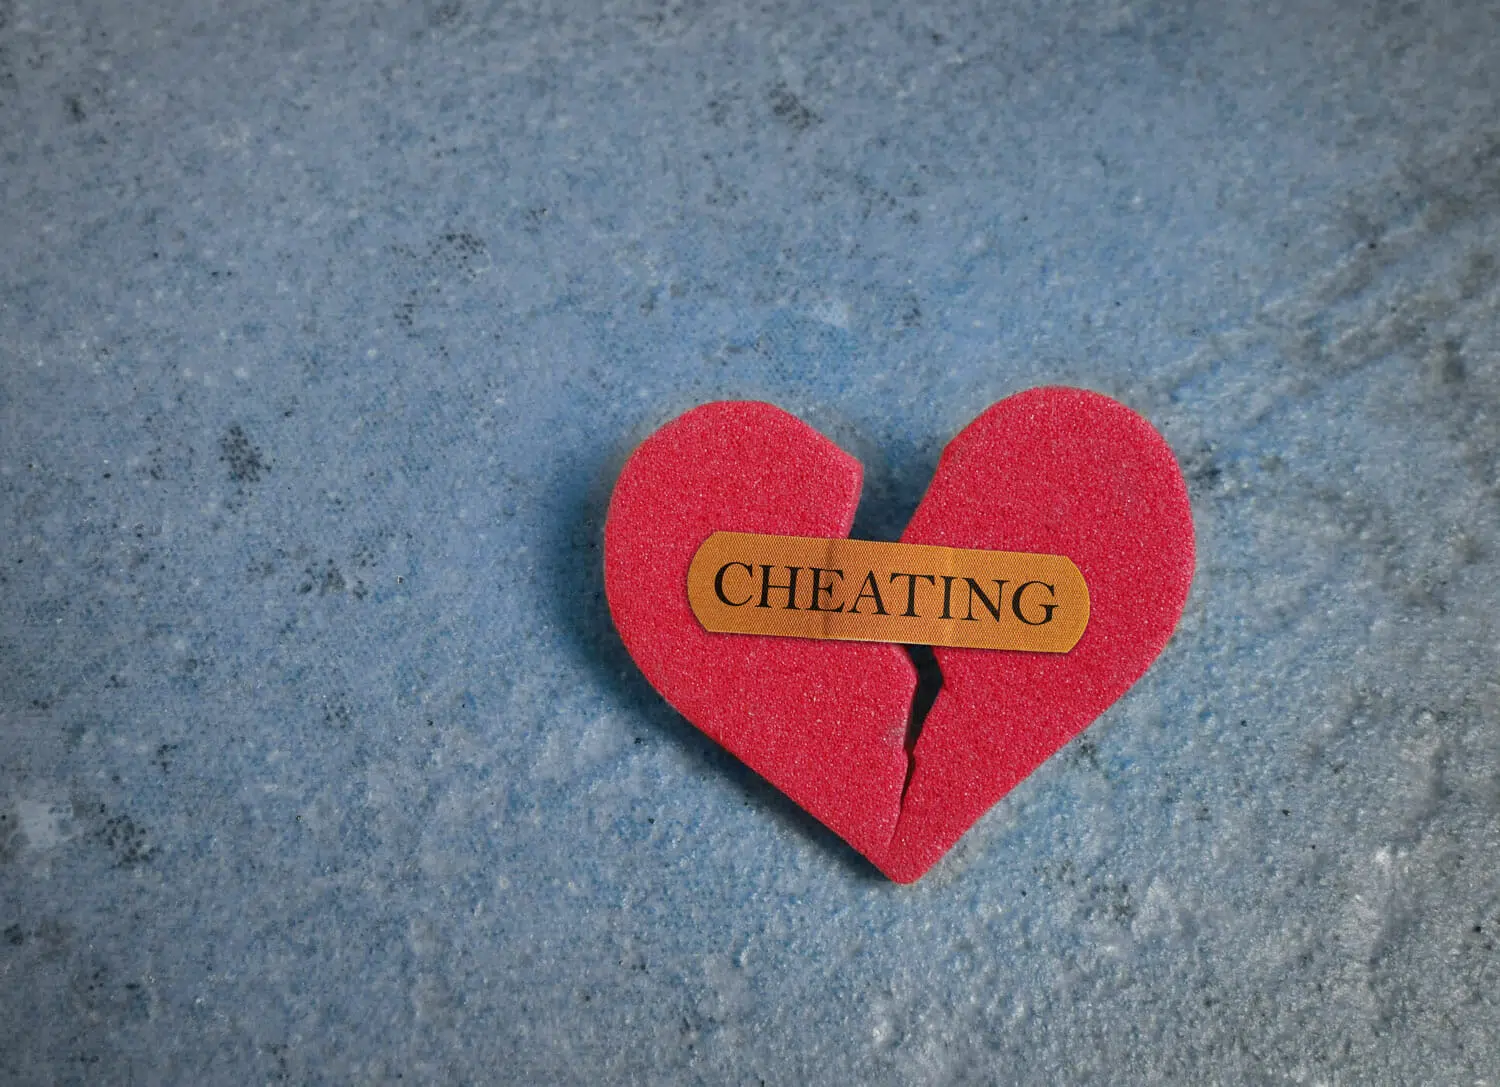 wife is cheating - should I divorce her?